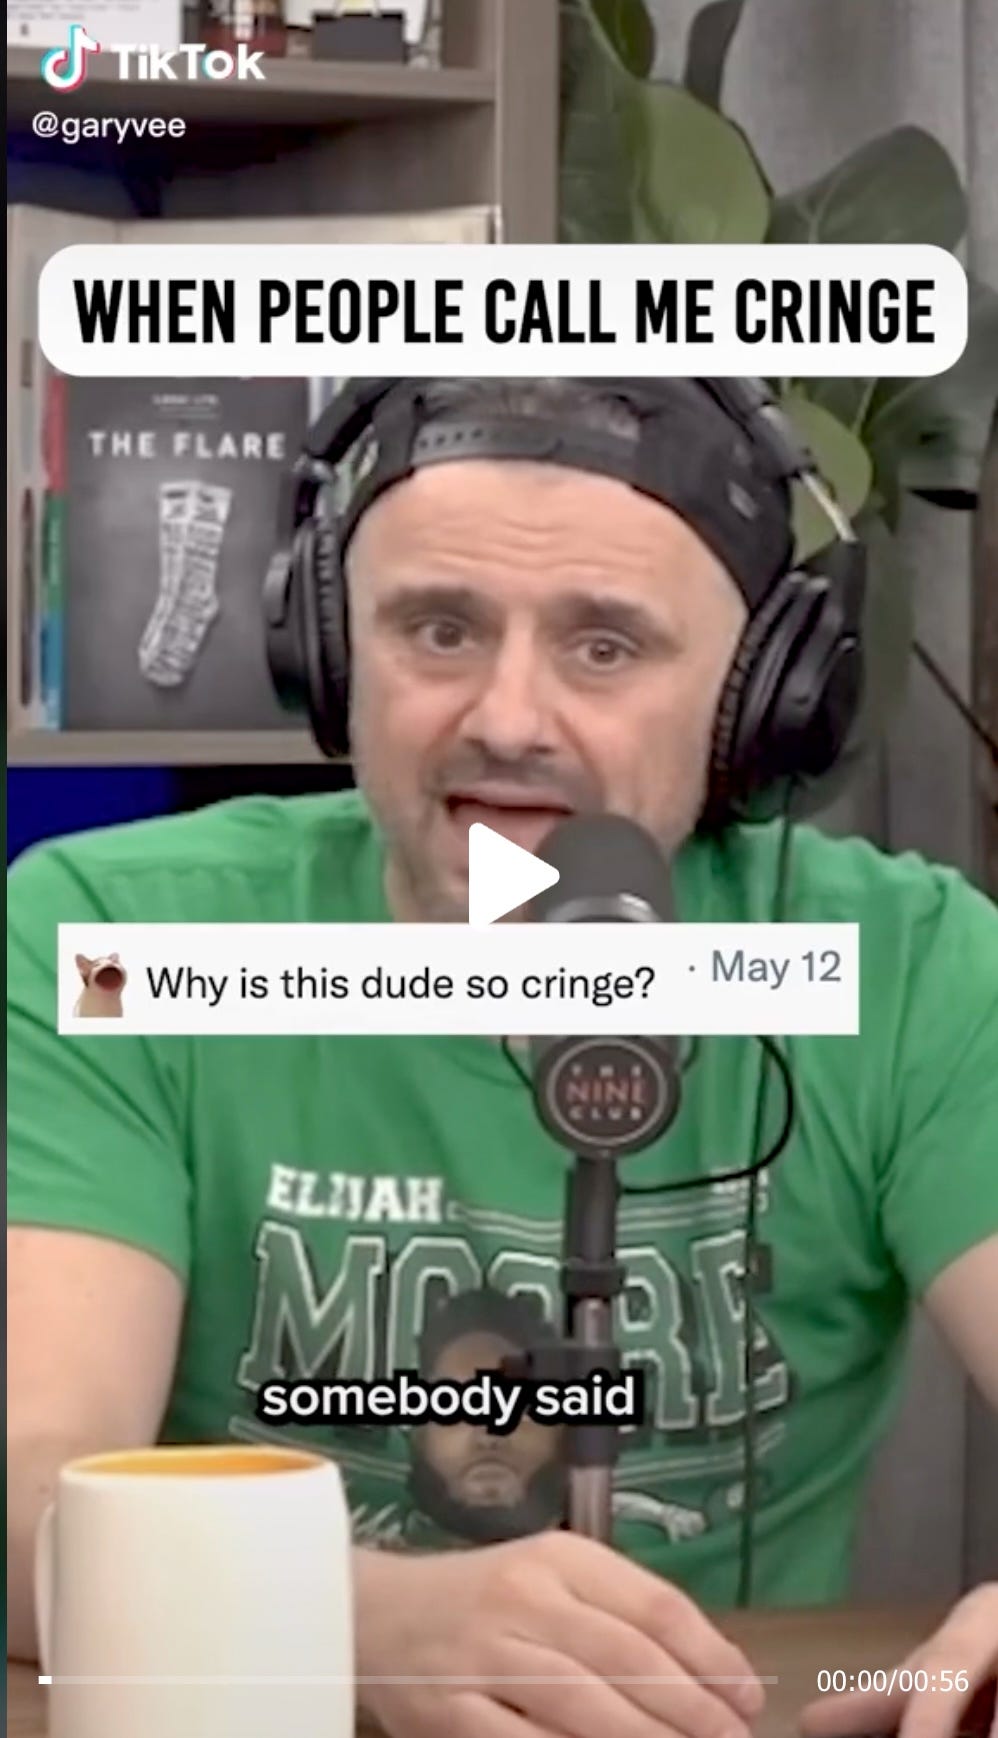 Gary Vee responding to a negative comment